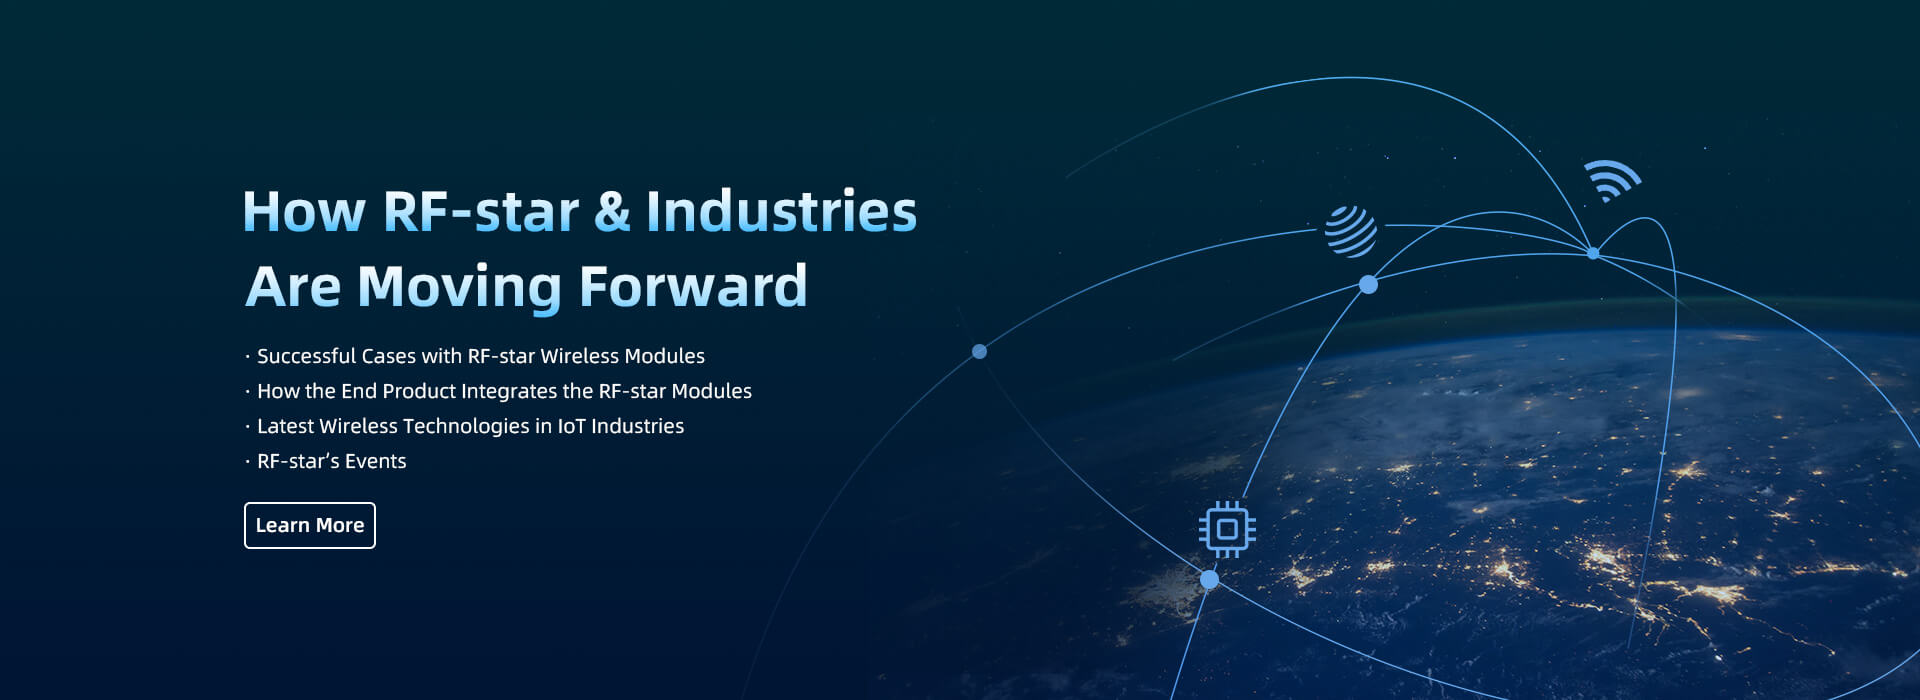 How RF-star & Industries Are Moving Forward